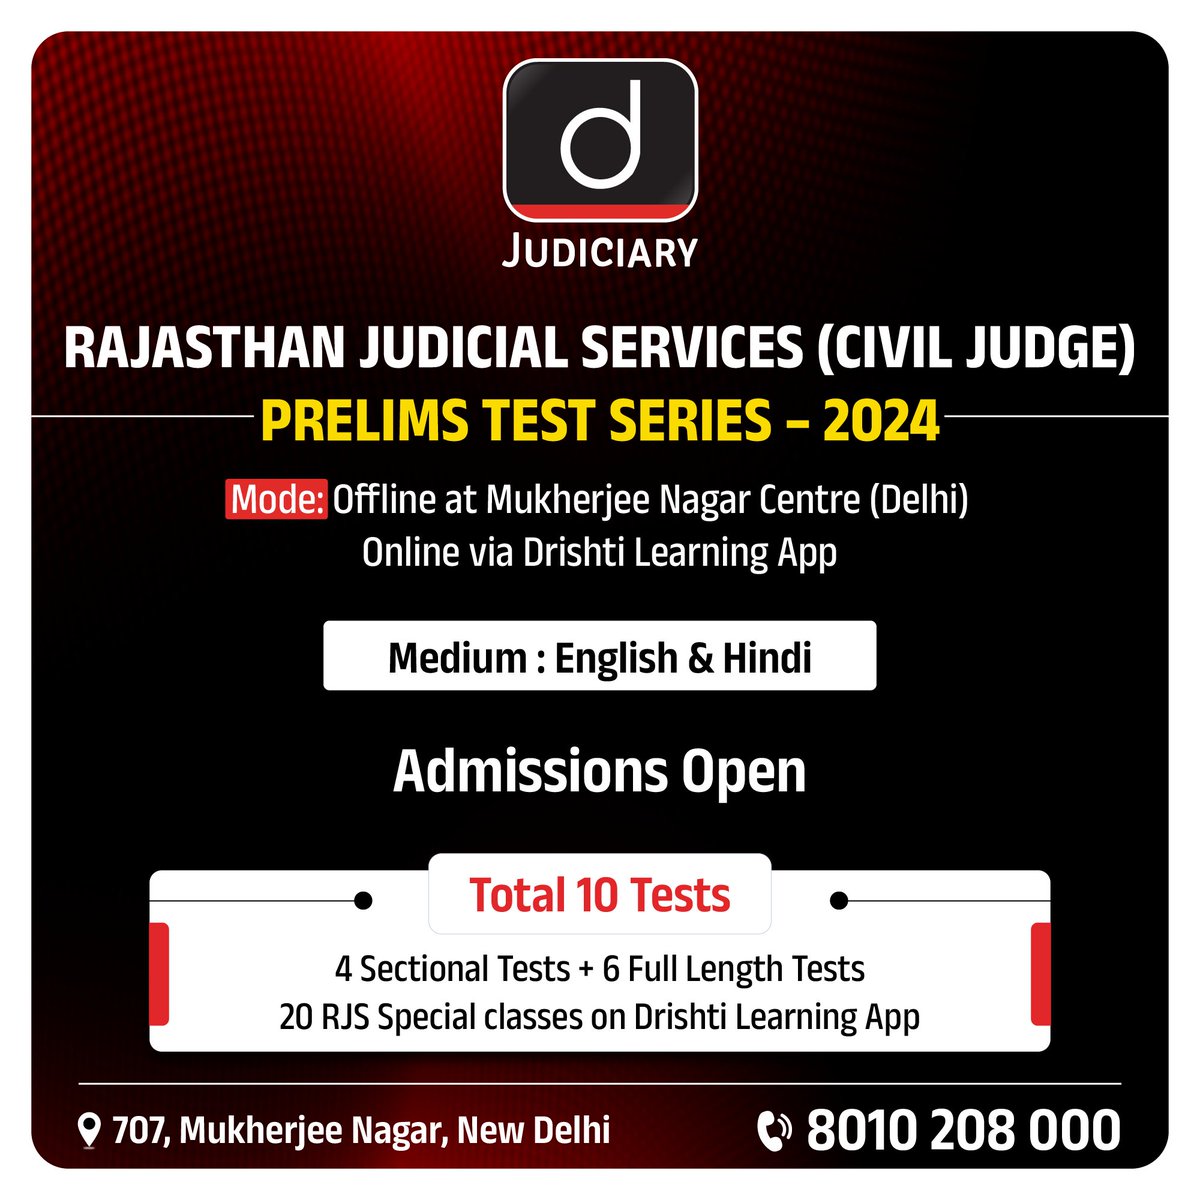 Lay the foundation for your Civil Judge career with our Rajasthan Judicial Services Prelims Test Series 2024!

Check the link: drishti.xyz/RJSCivilJudge-…

#Judiciary #Prelims2024 #Law #CivilJudge #TestSeries  #PublicServices #Practice #DrishtiJudiciary #TeamDrishti